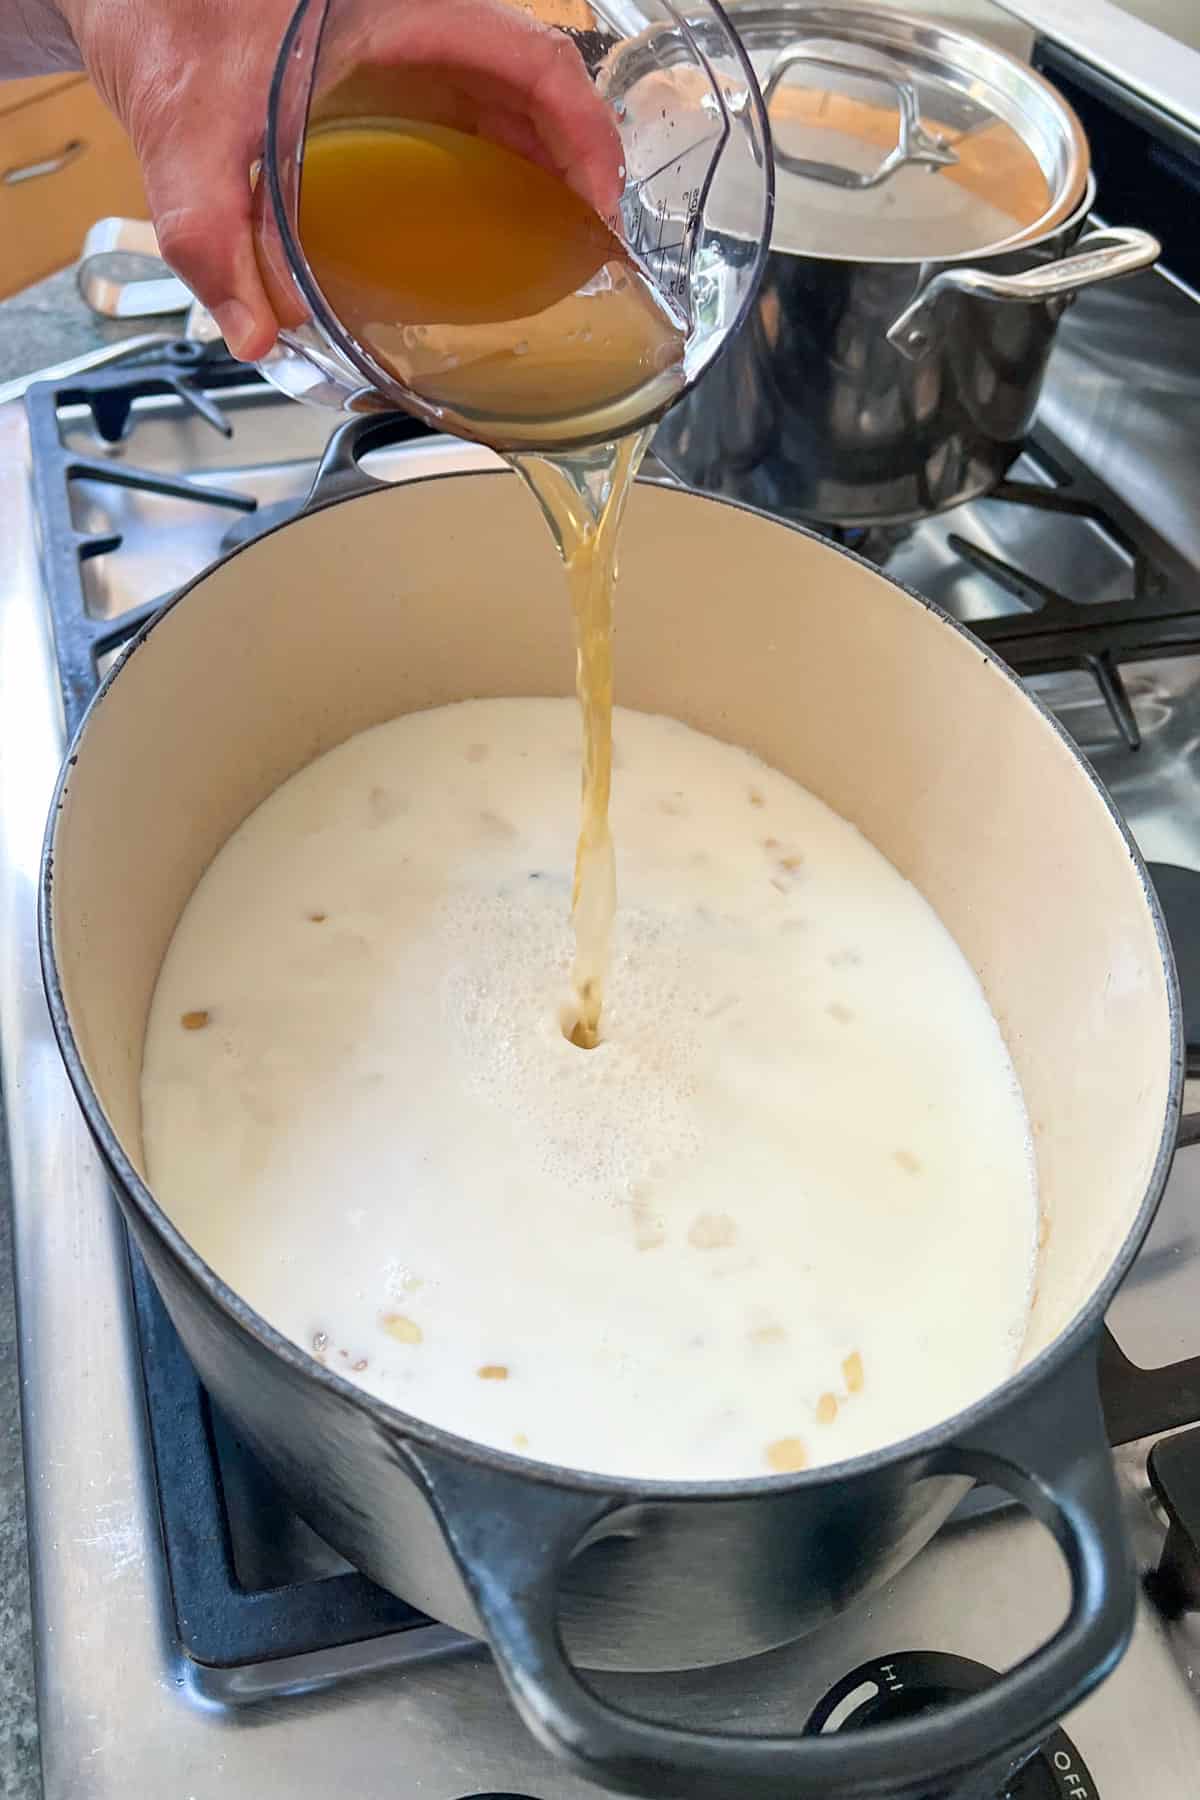 chicken broth being poured from above, into a dutch oven filled with a milky broth.